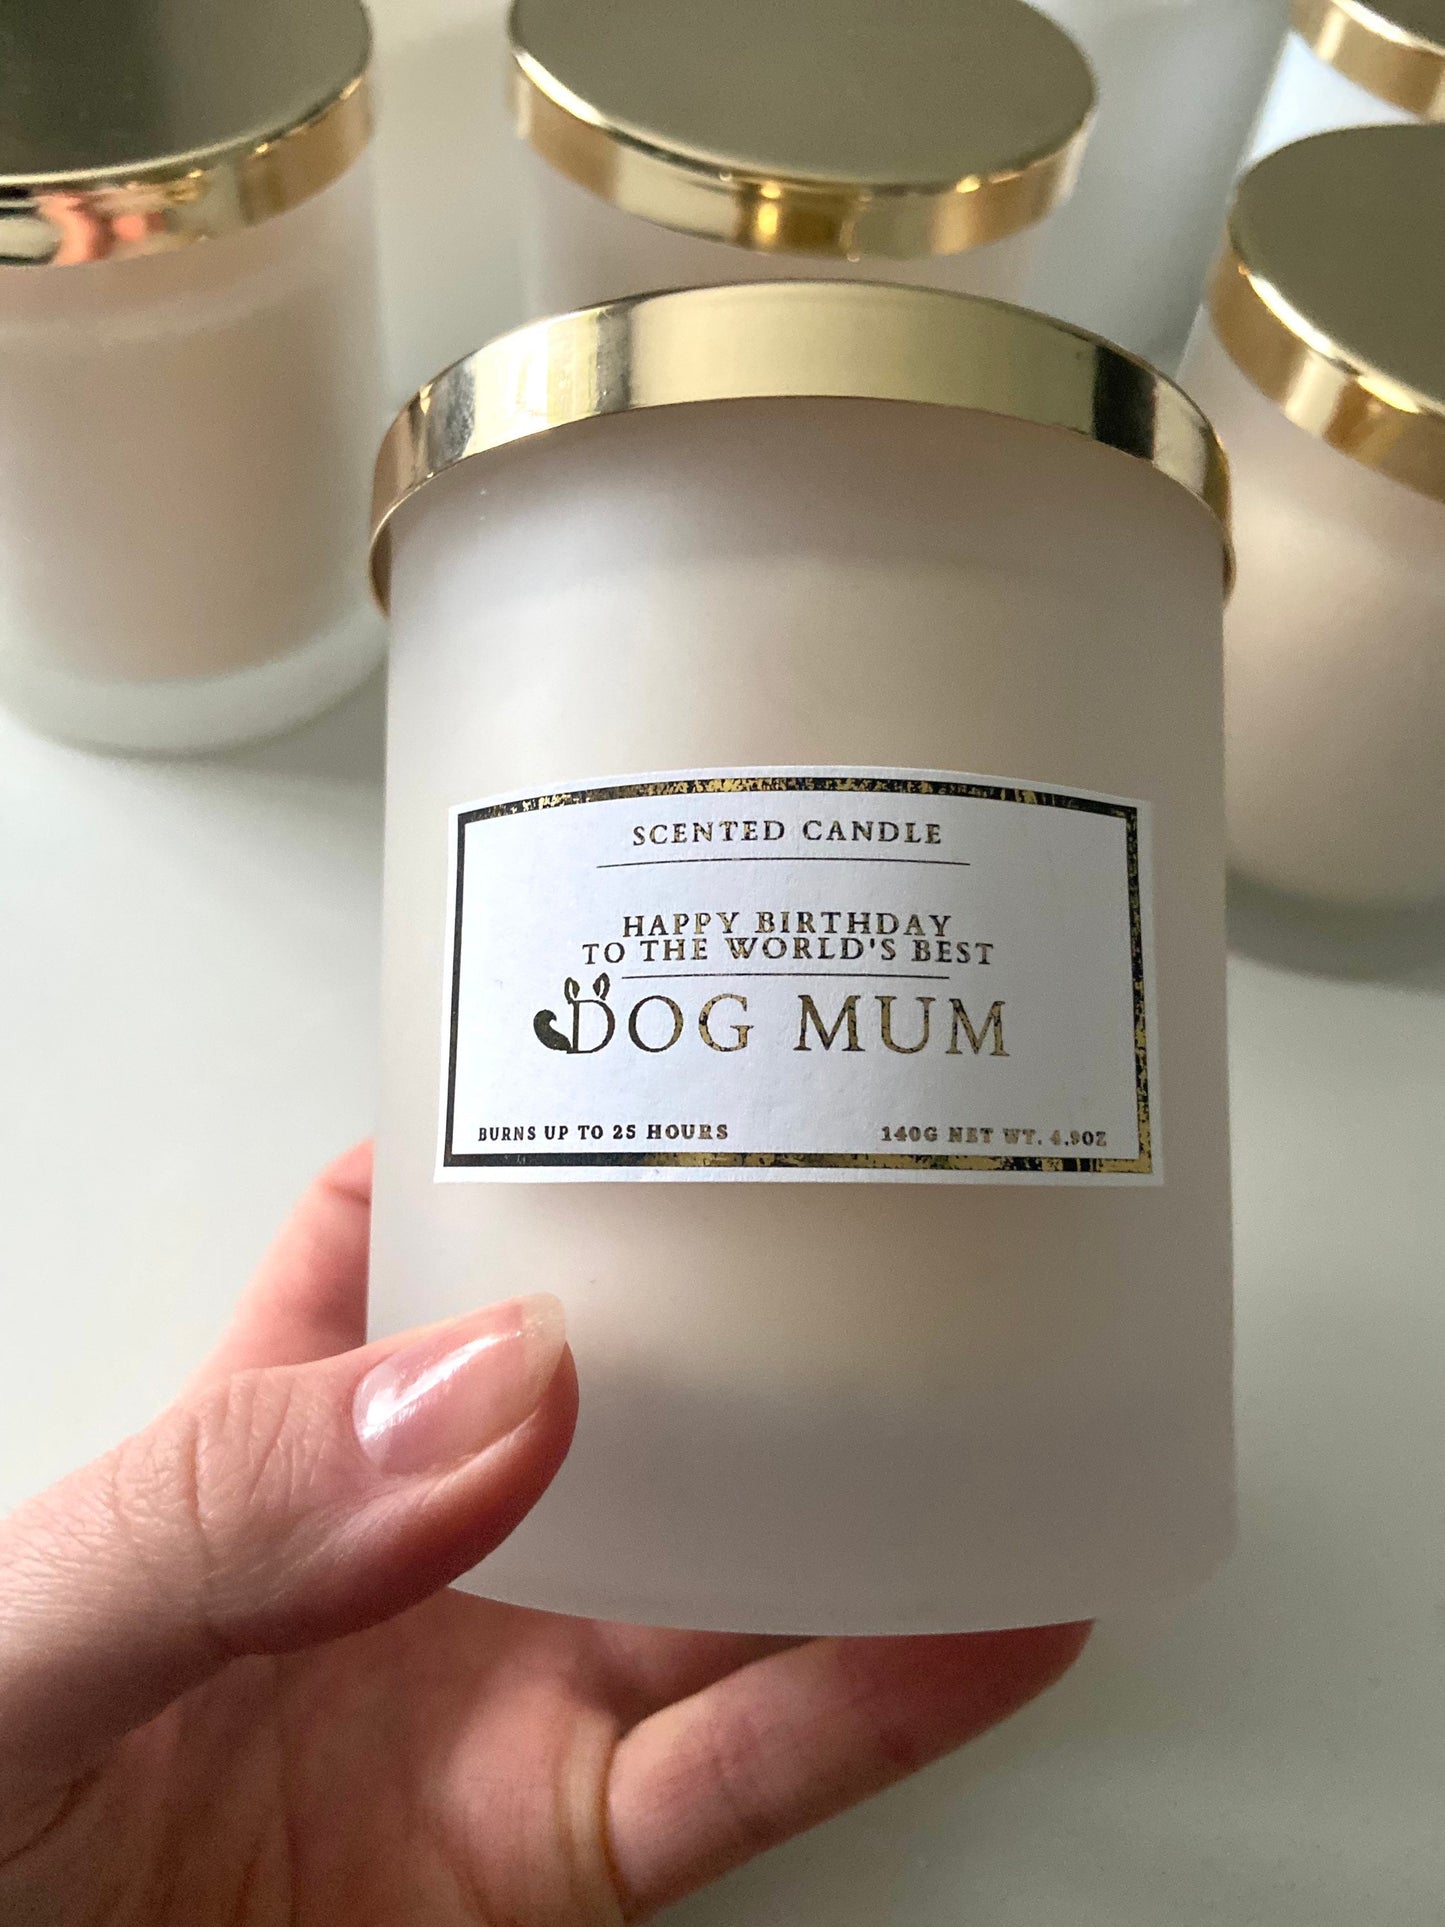 Happy Birthday To The World’s Best Dog Mum Candle